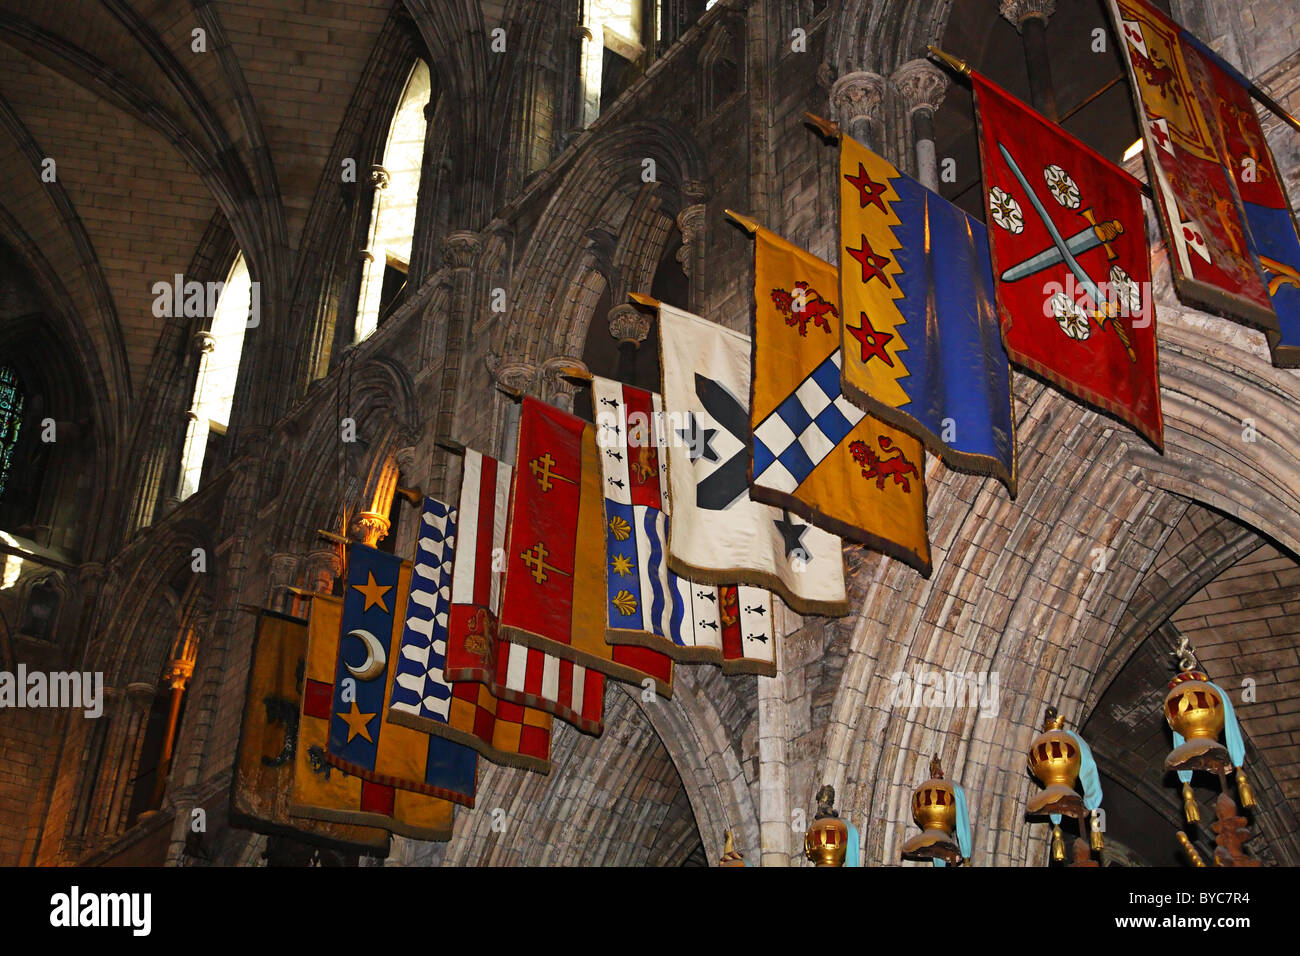 Flags, St. Patrick's Cathedral Dublin Ireland Stock Photo